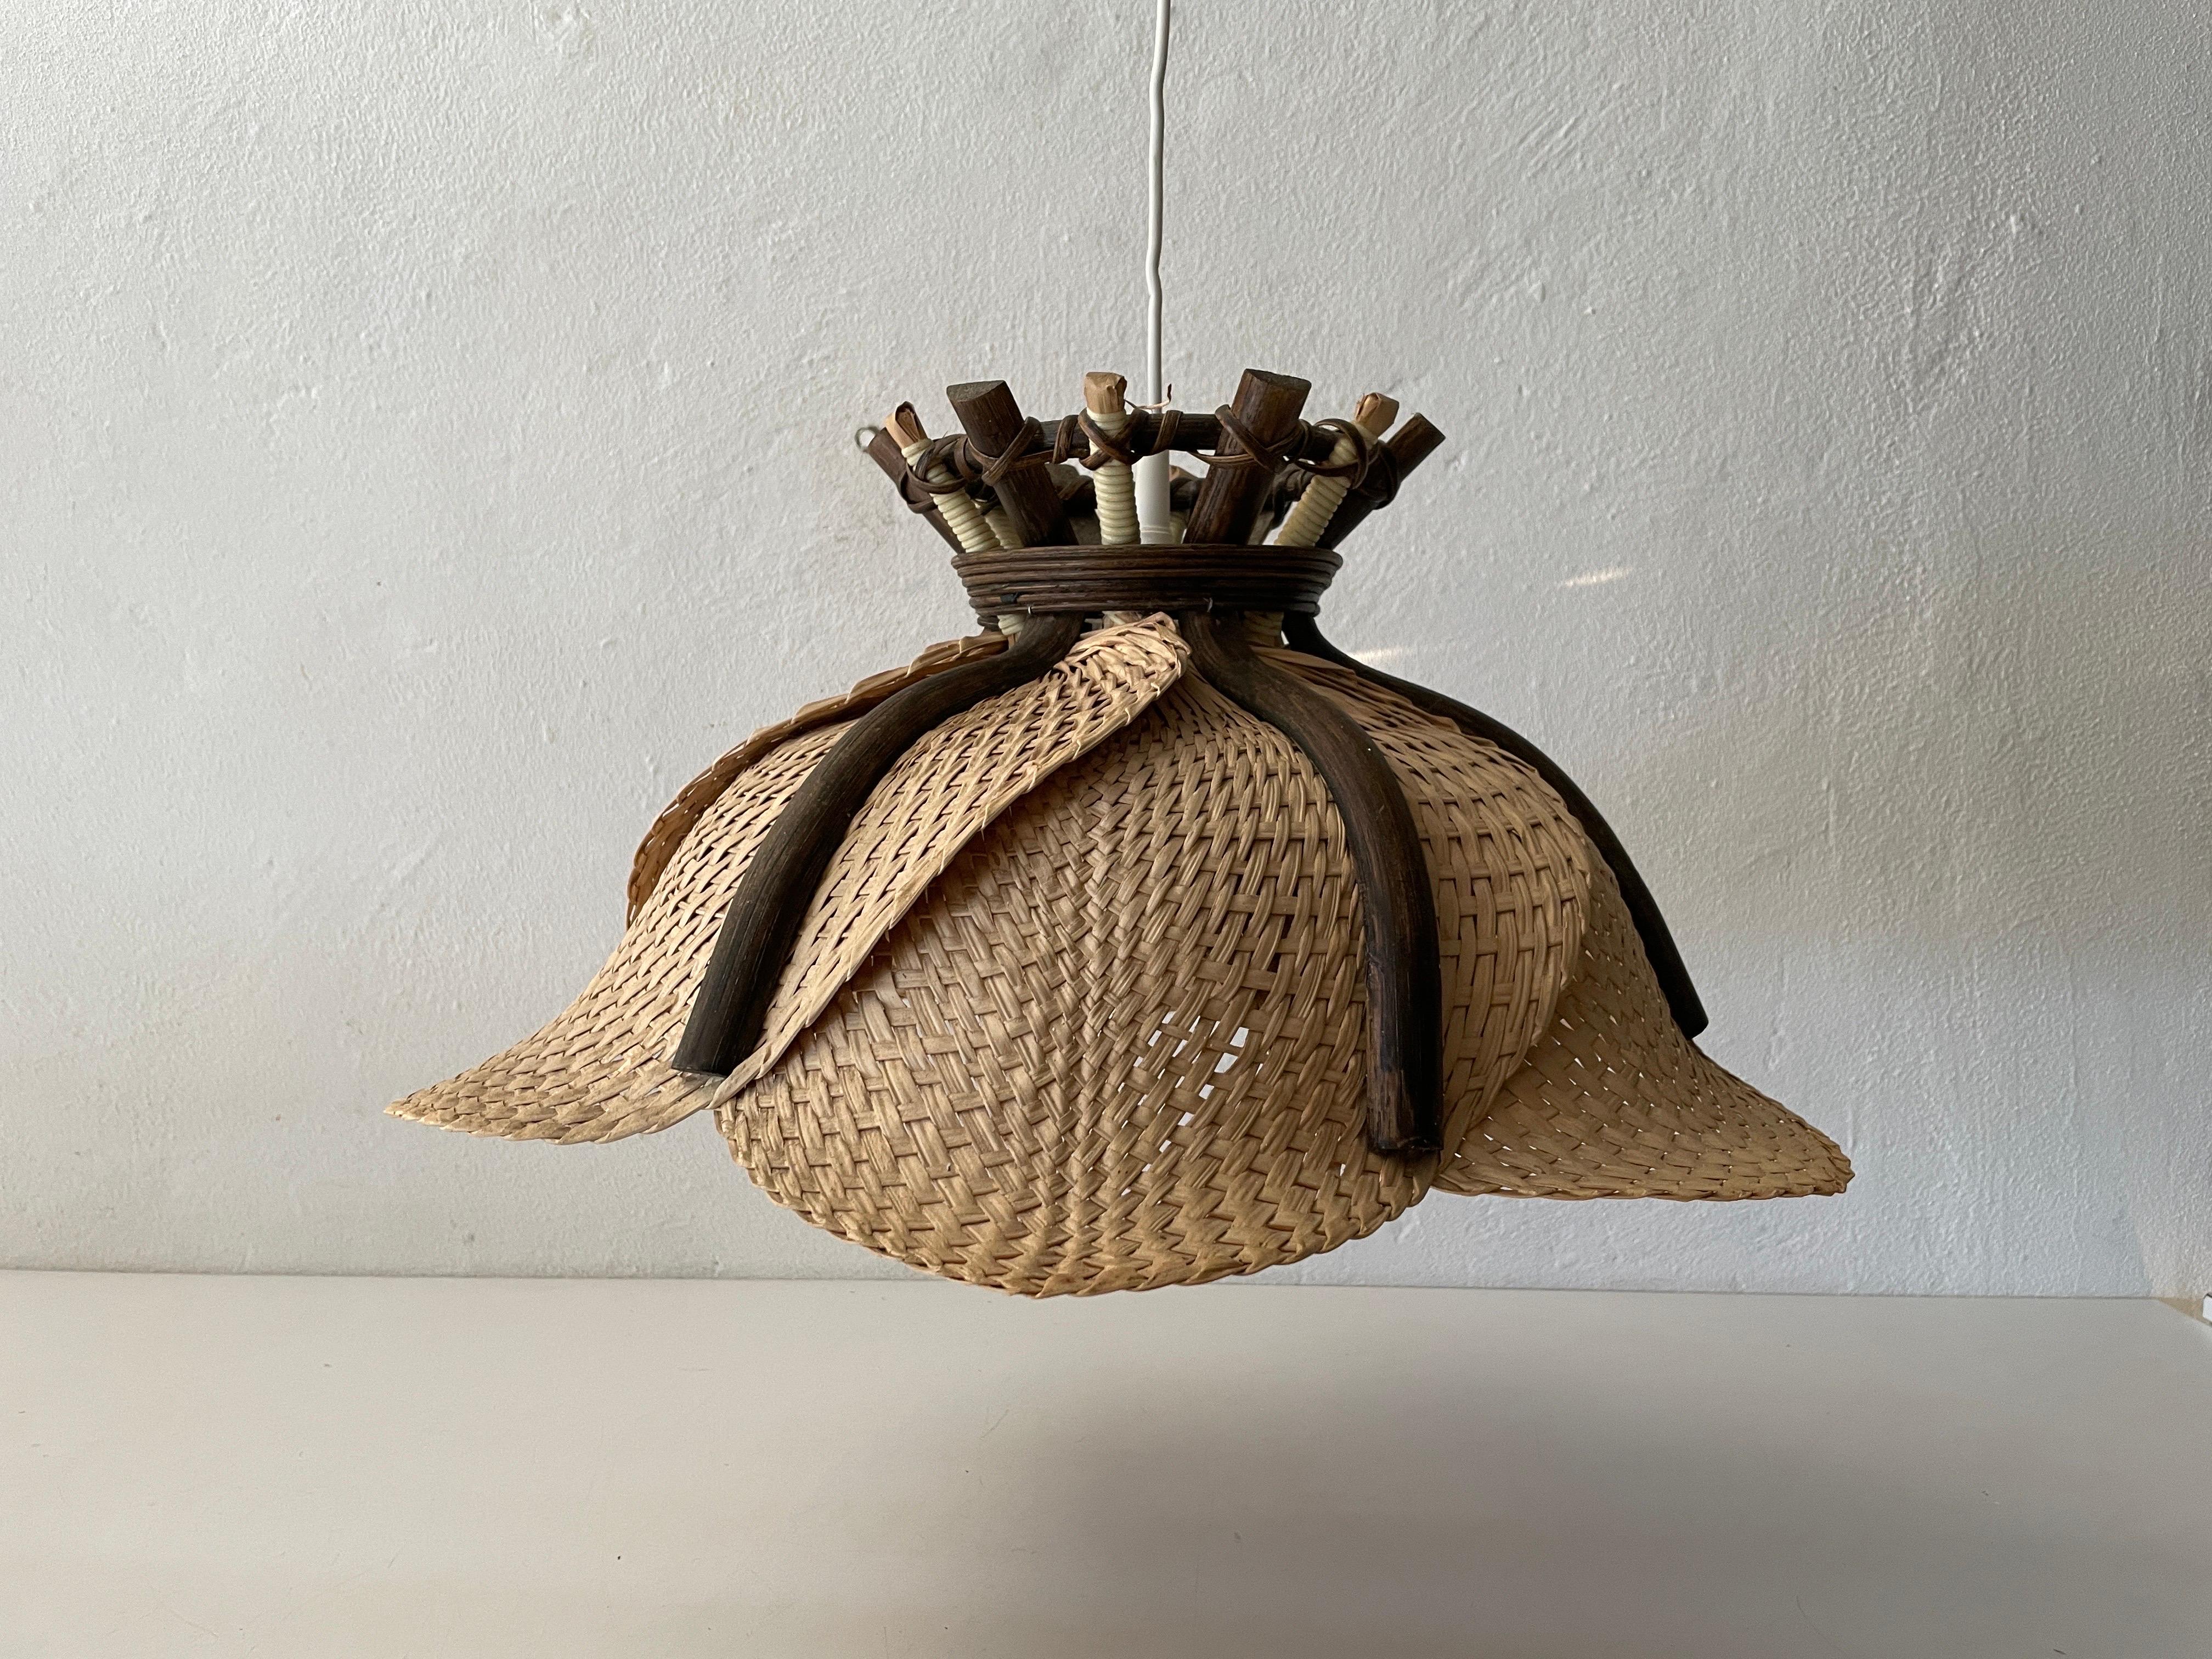 Modernist natural wicker pendant lamp, 1960s Germany.

Lampshade is in very good vintage condition.
No crack, no missed piece.
Original canopy.

This lamp works with E27 light bulb. Max 100W
Wired and suitable to use with 220V and 110V for